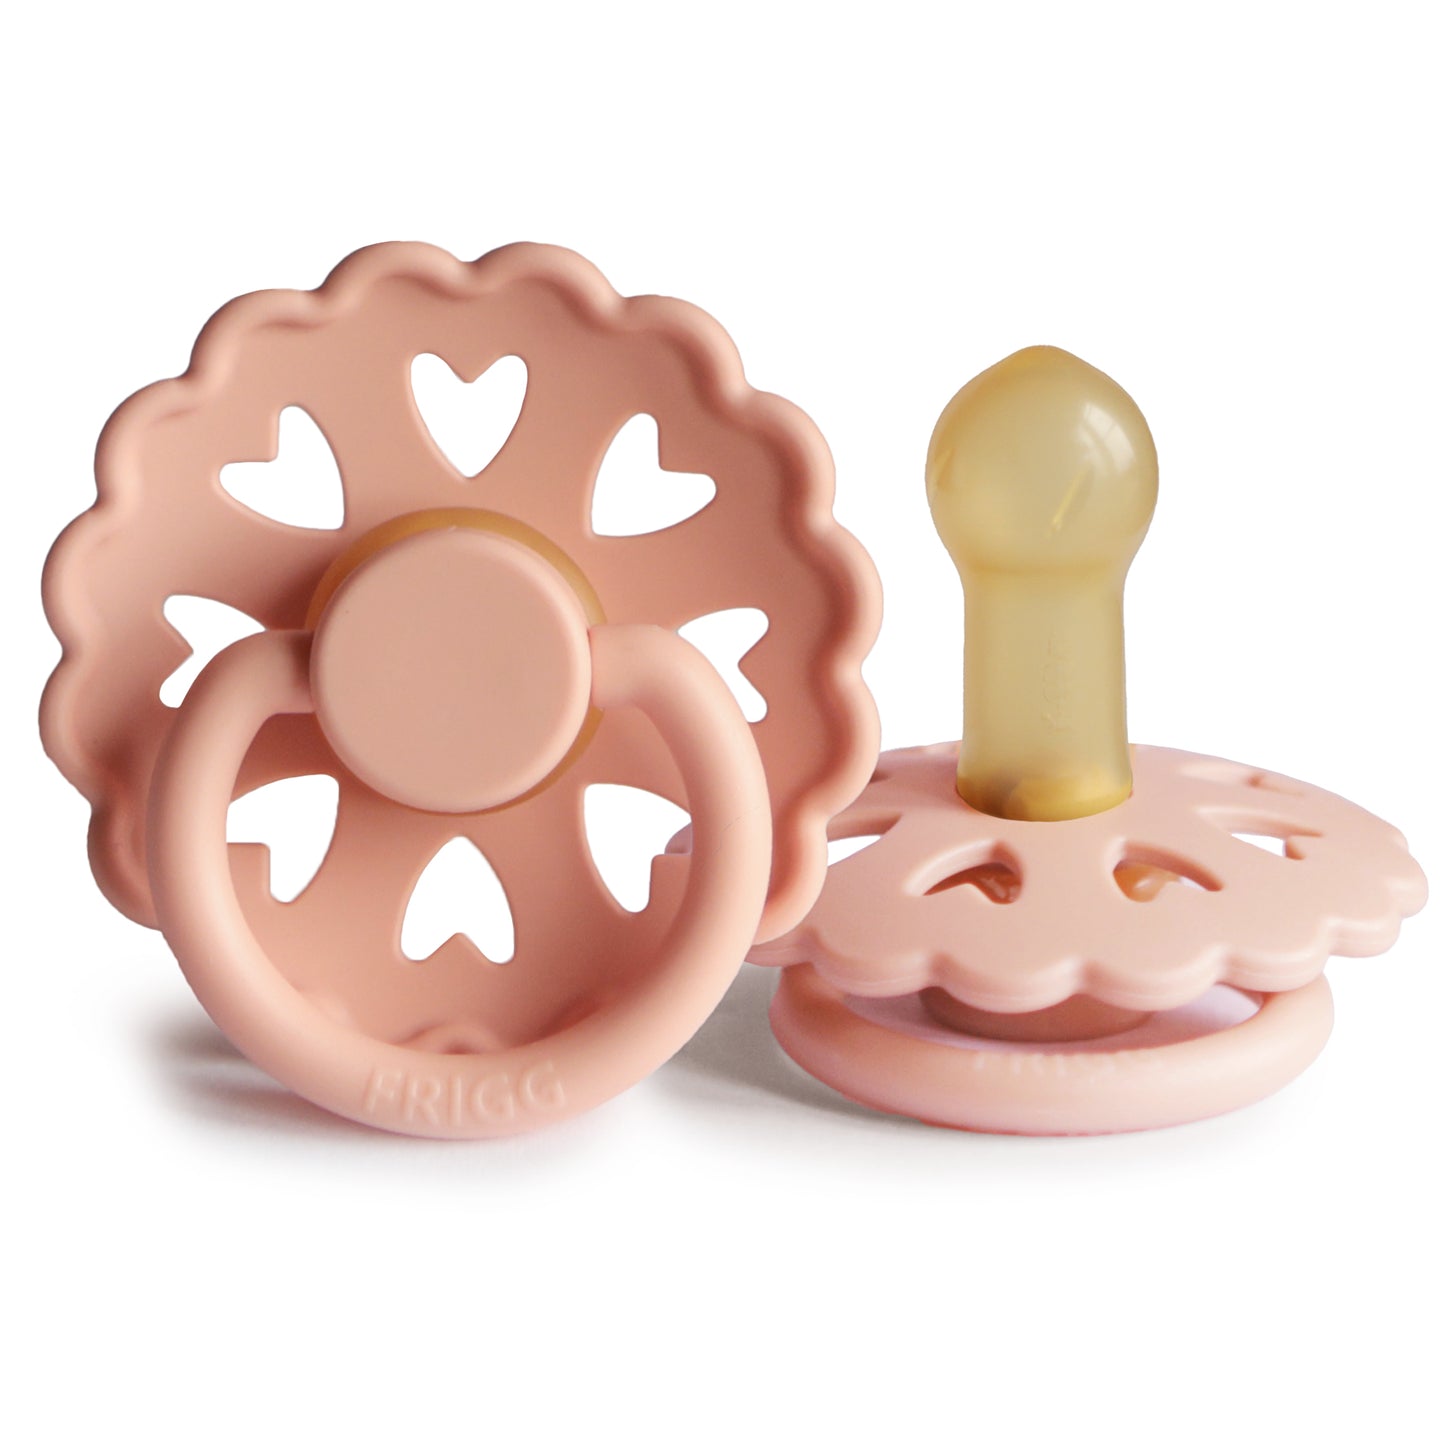 FRIGG Fairytale Latex Baby Pacifier (1 Piece)